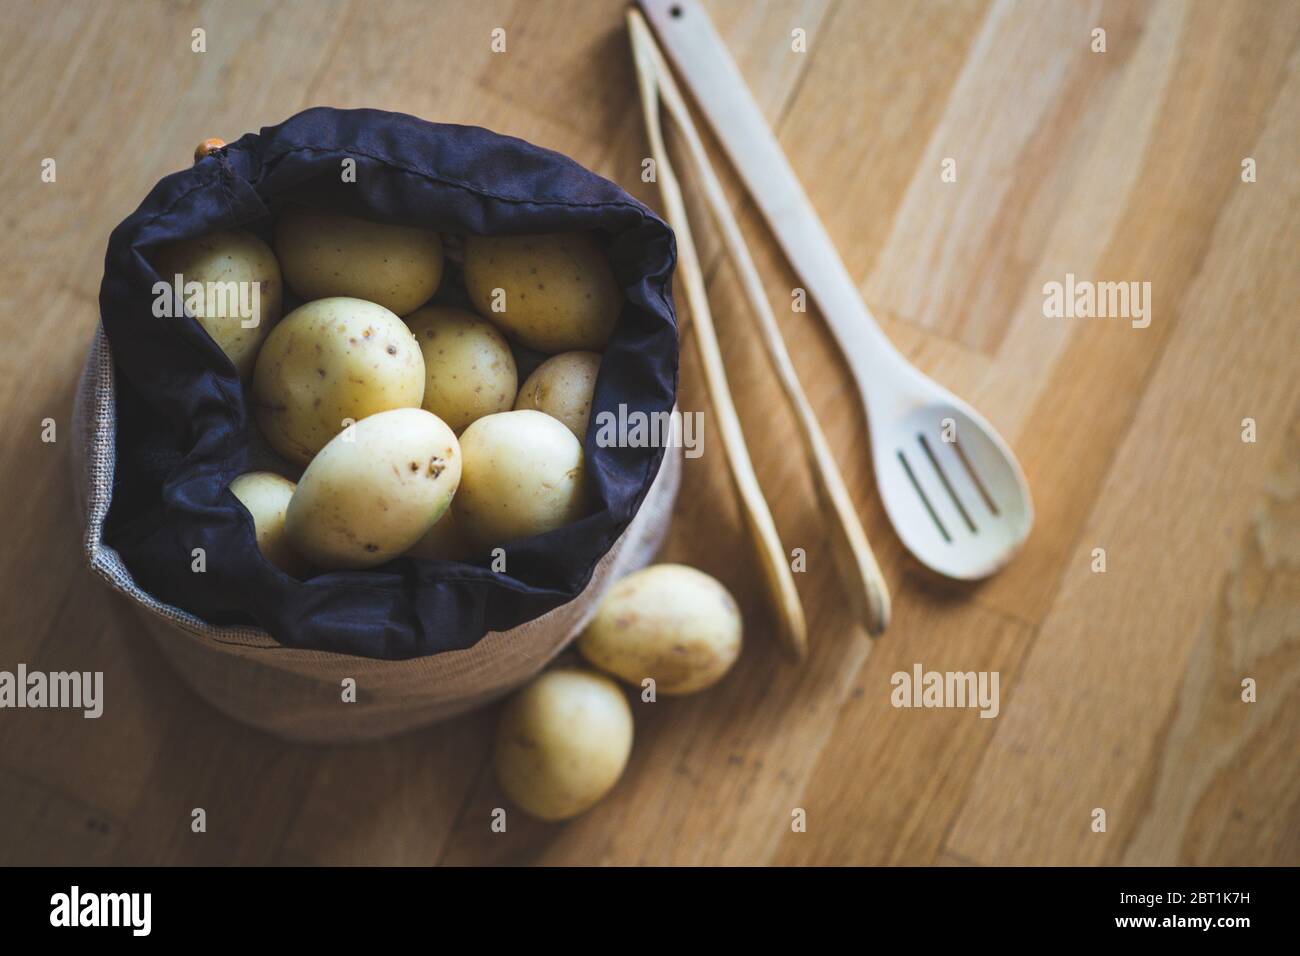 Raw potato food. Fresh potatoes in an old sack on wooden background. Top view Stock Photo